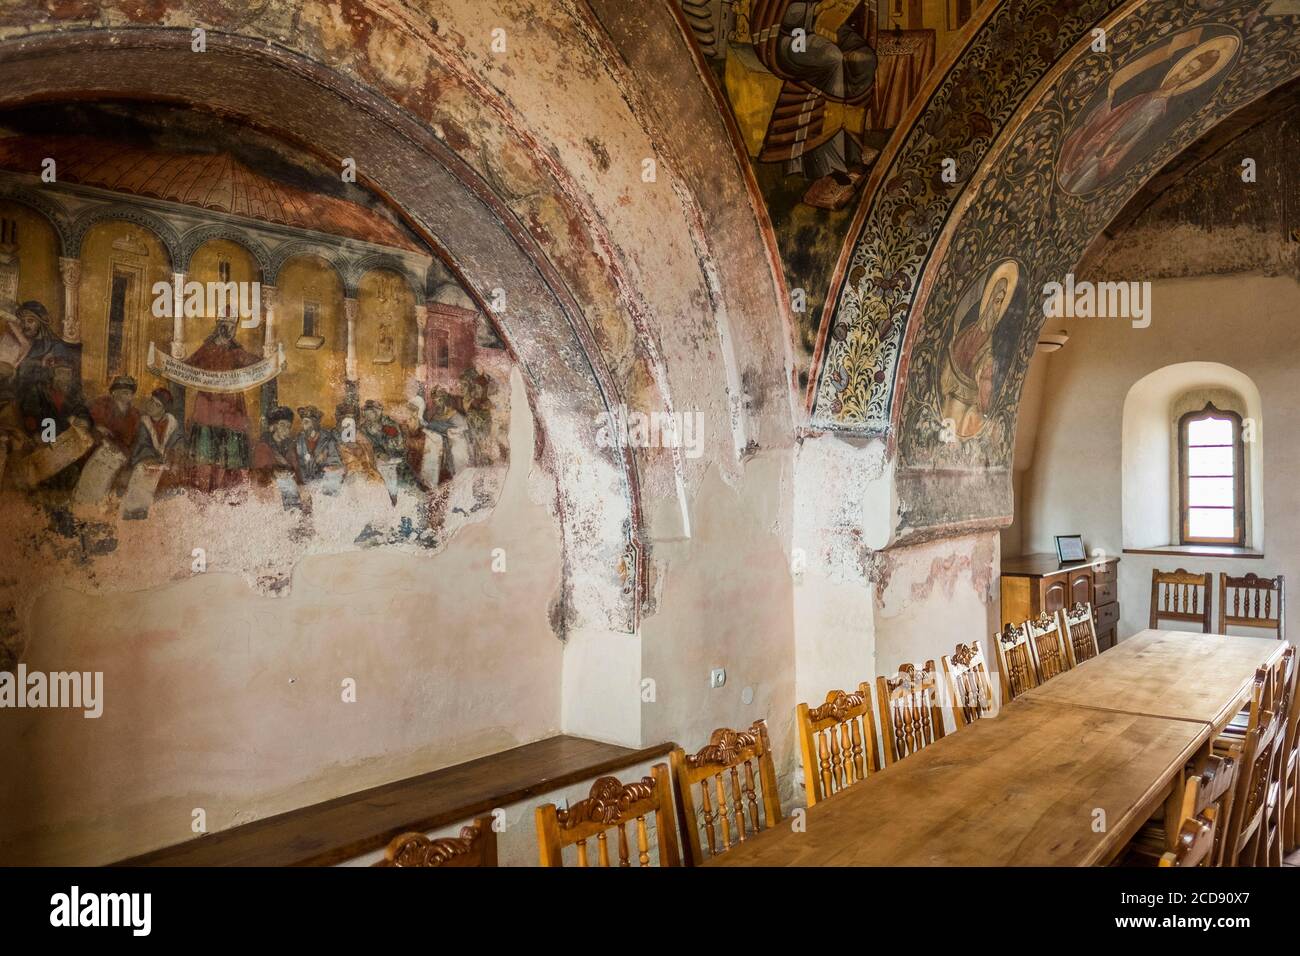 Romania, Wallachia, Horezu, the Horezu Monastery was listed as a UNESCO World Heritage Site in 1993 for the quality of conservation of these paintings of more than 300 years Stock Photo